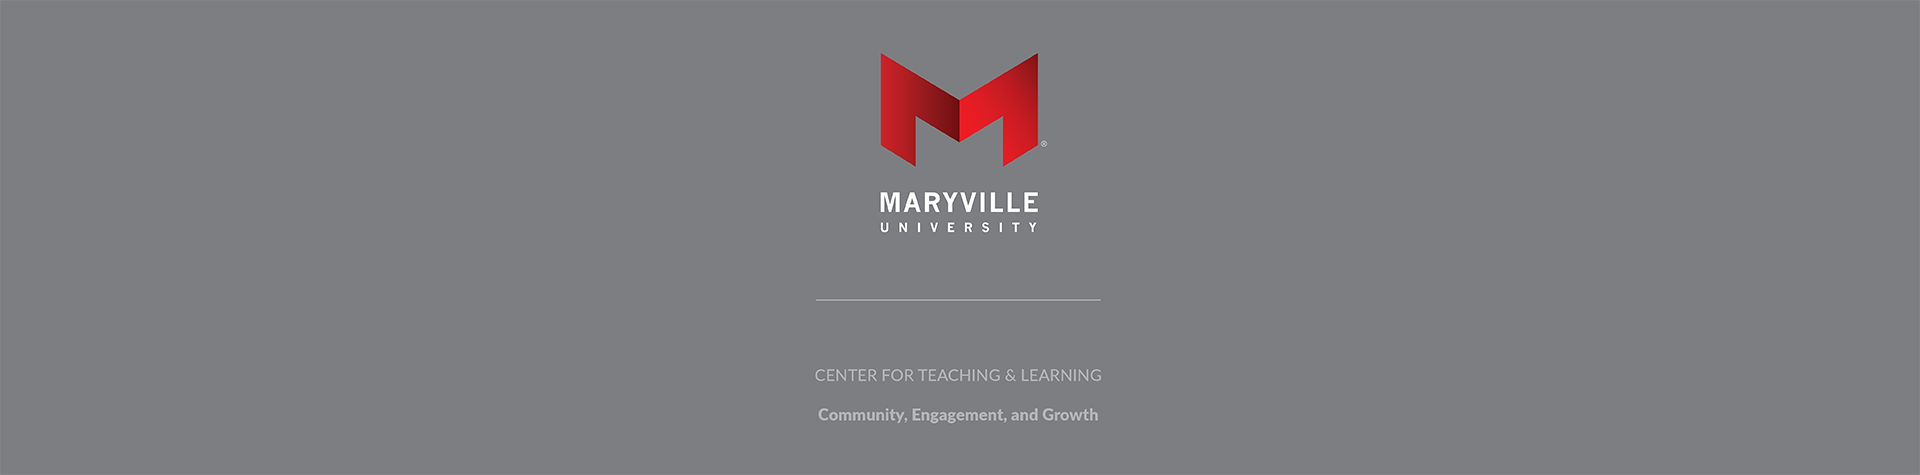 center for teaching and learning banner with logo